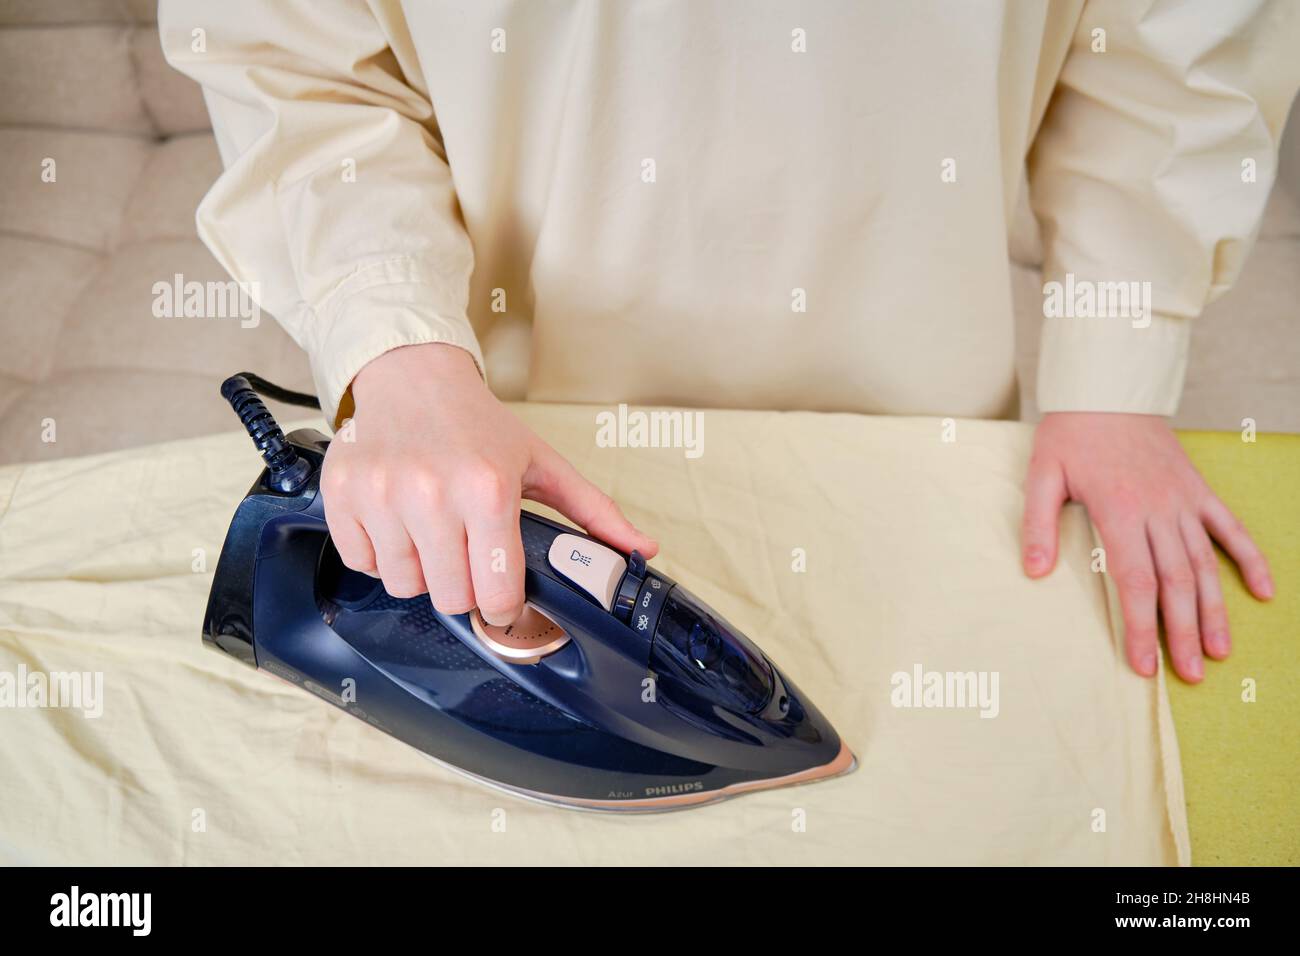 Close-up Of Woman's Hand Ironing Cloth On Ironing Board Stock Photo - Alamy